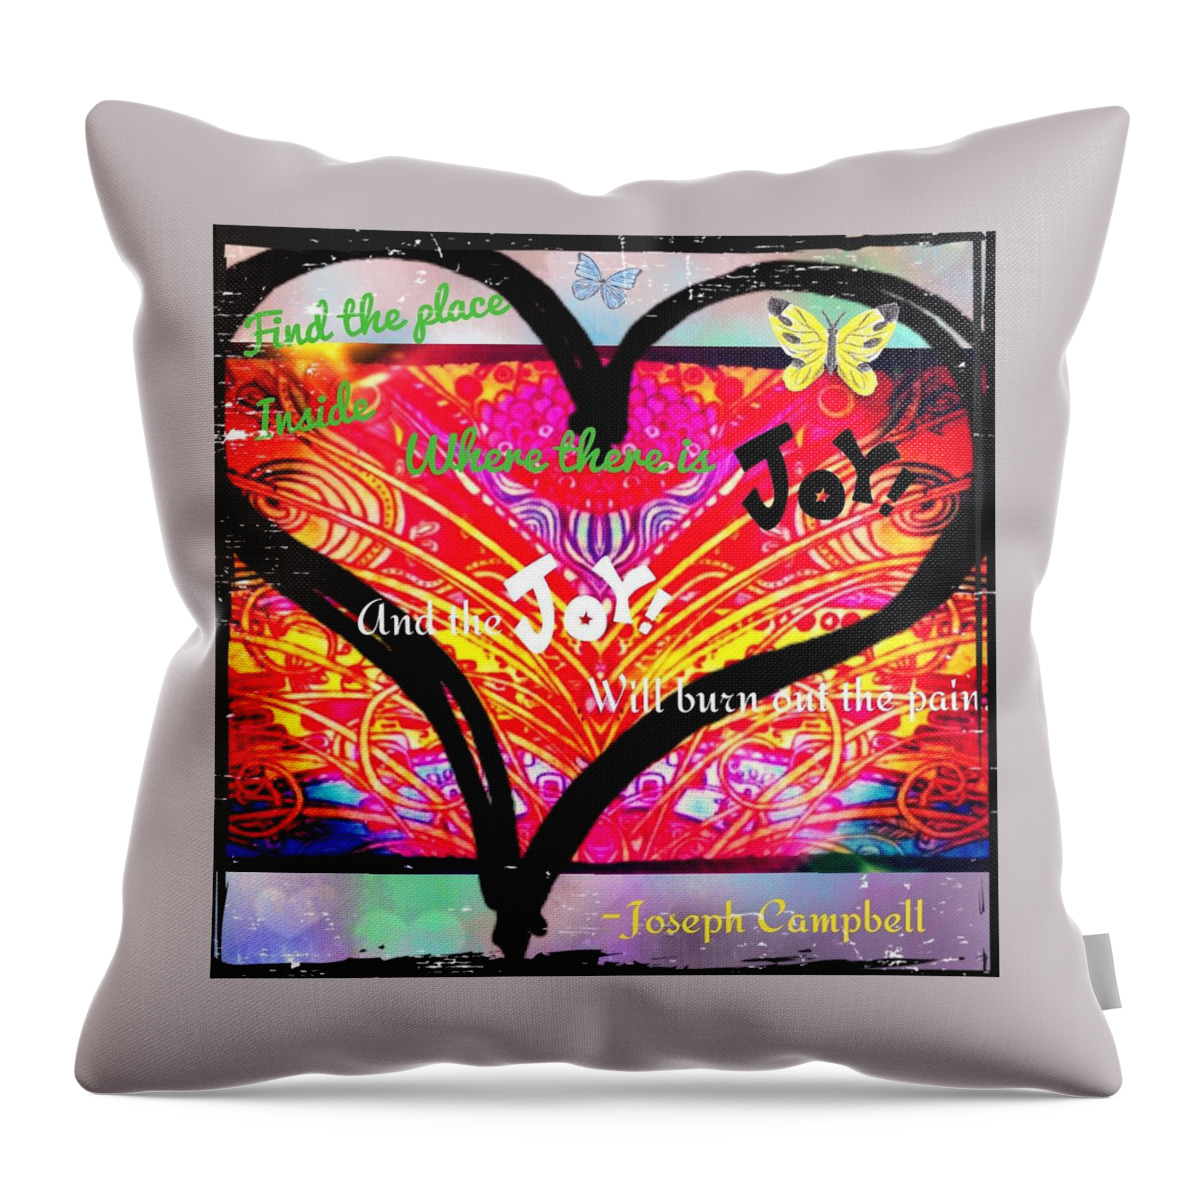 Find The Place Inside Where There Is Joy And The Joy Will Burn Out The Pain.-joseph Campbell Throw Pillow featuring the digital art Joy by Christine Paris